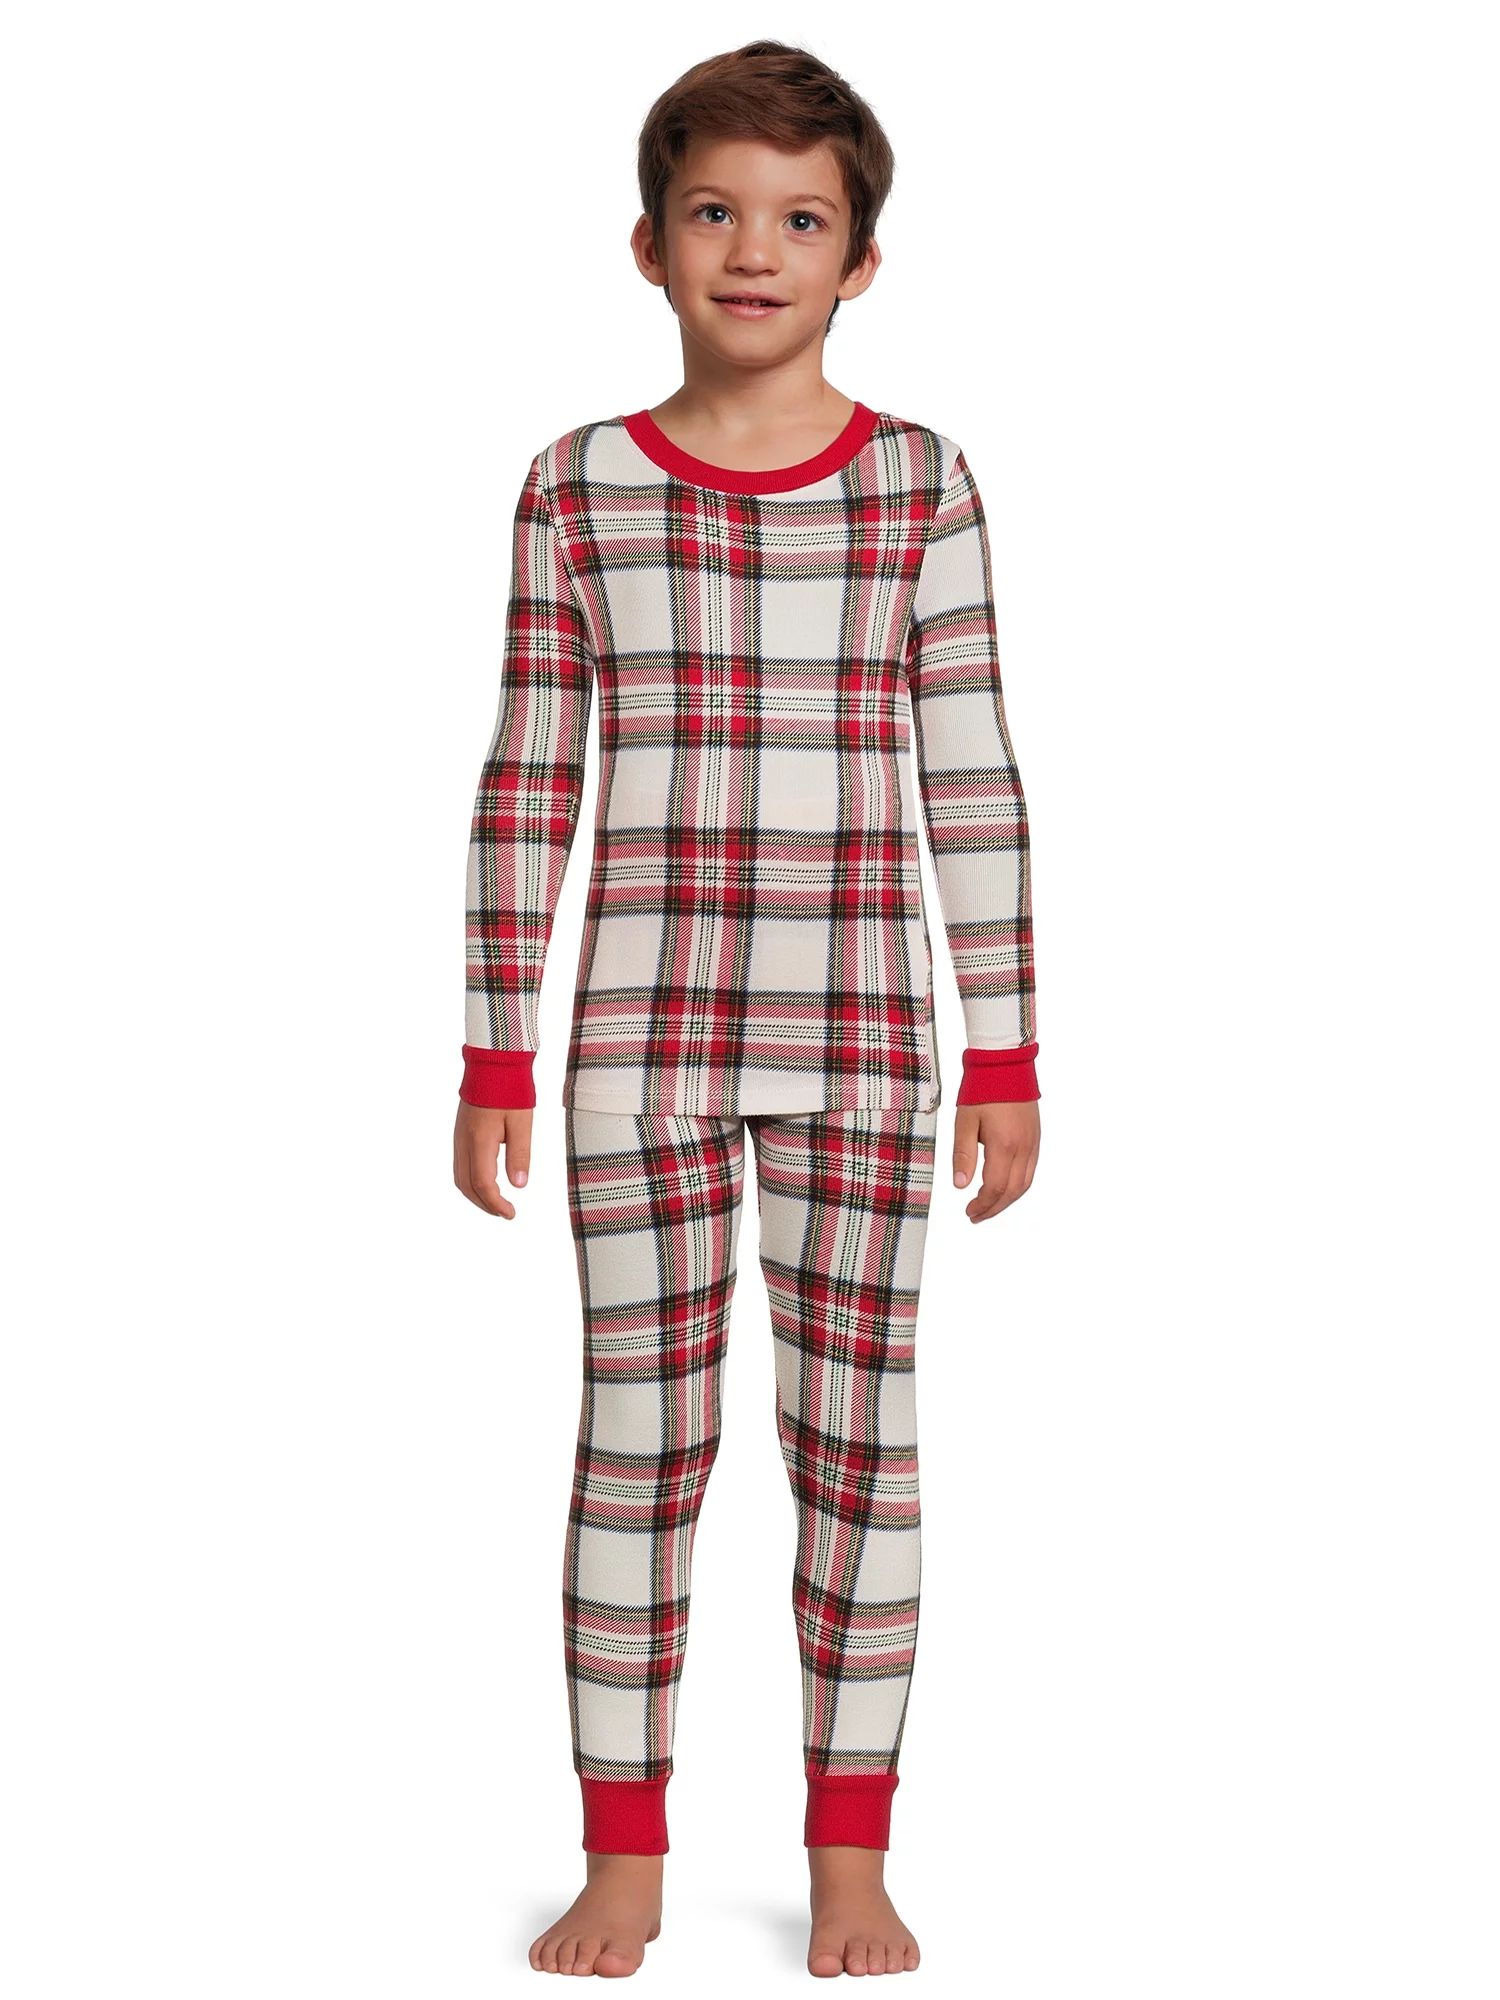 Holiday Time Boys Tight Fit Long Sleeve Pajama Top and Pants, 2-Piece Set, Sizes 4-10 | Walmart (US)